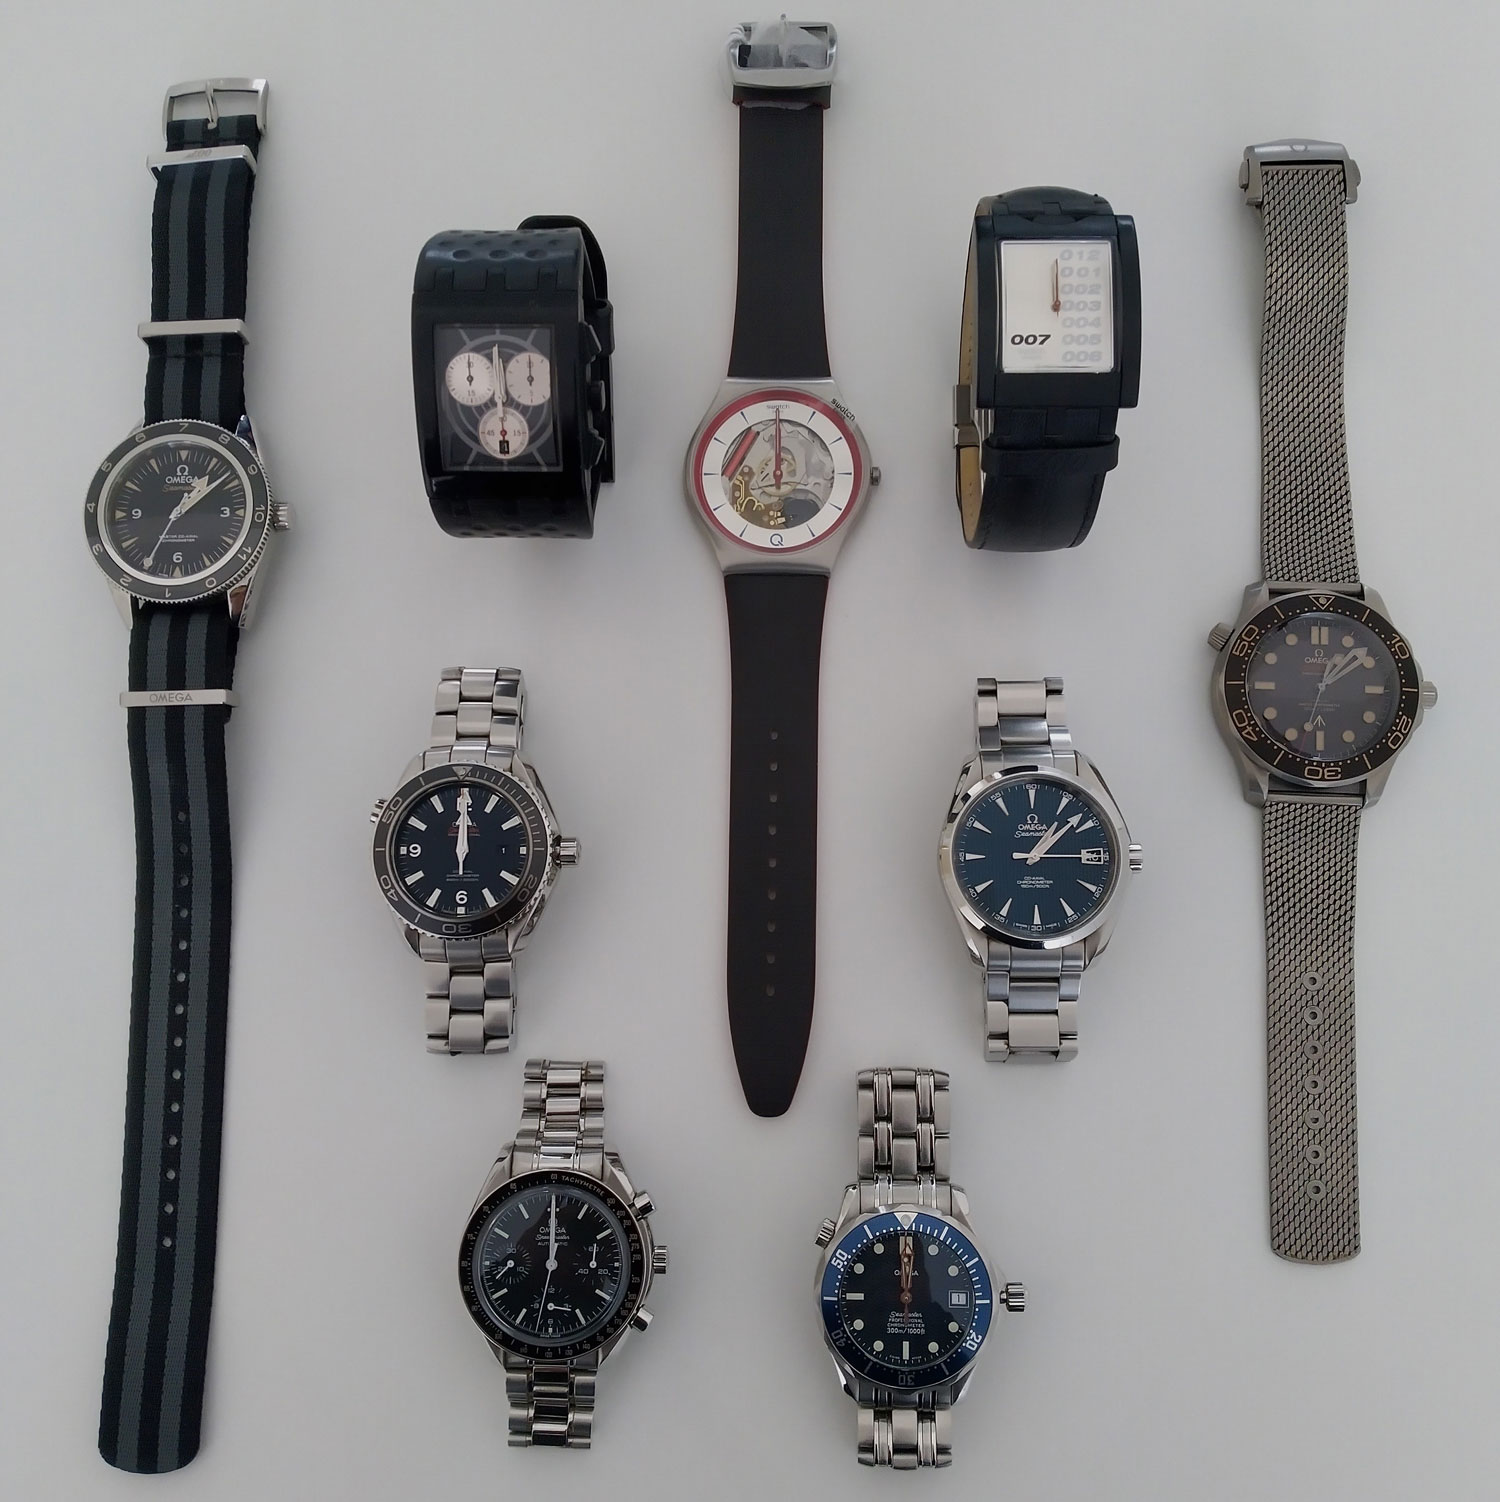 James Bond watch collection